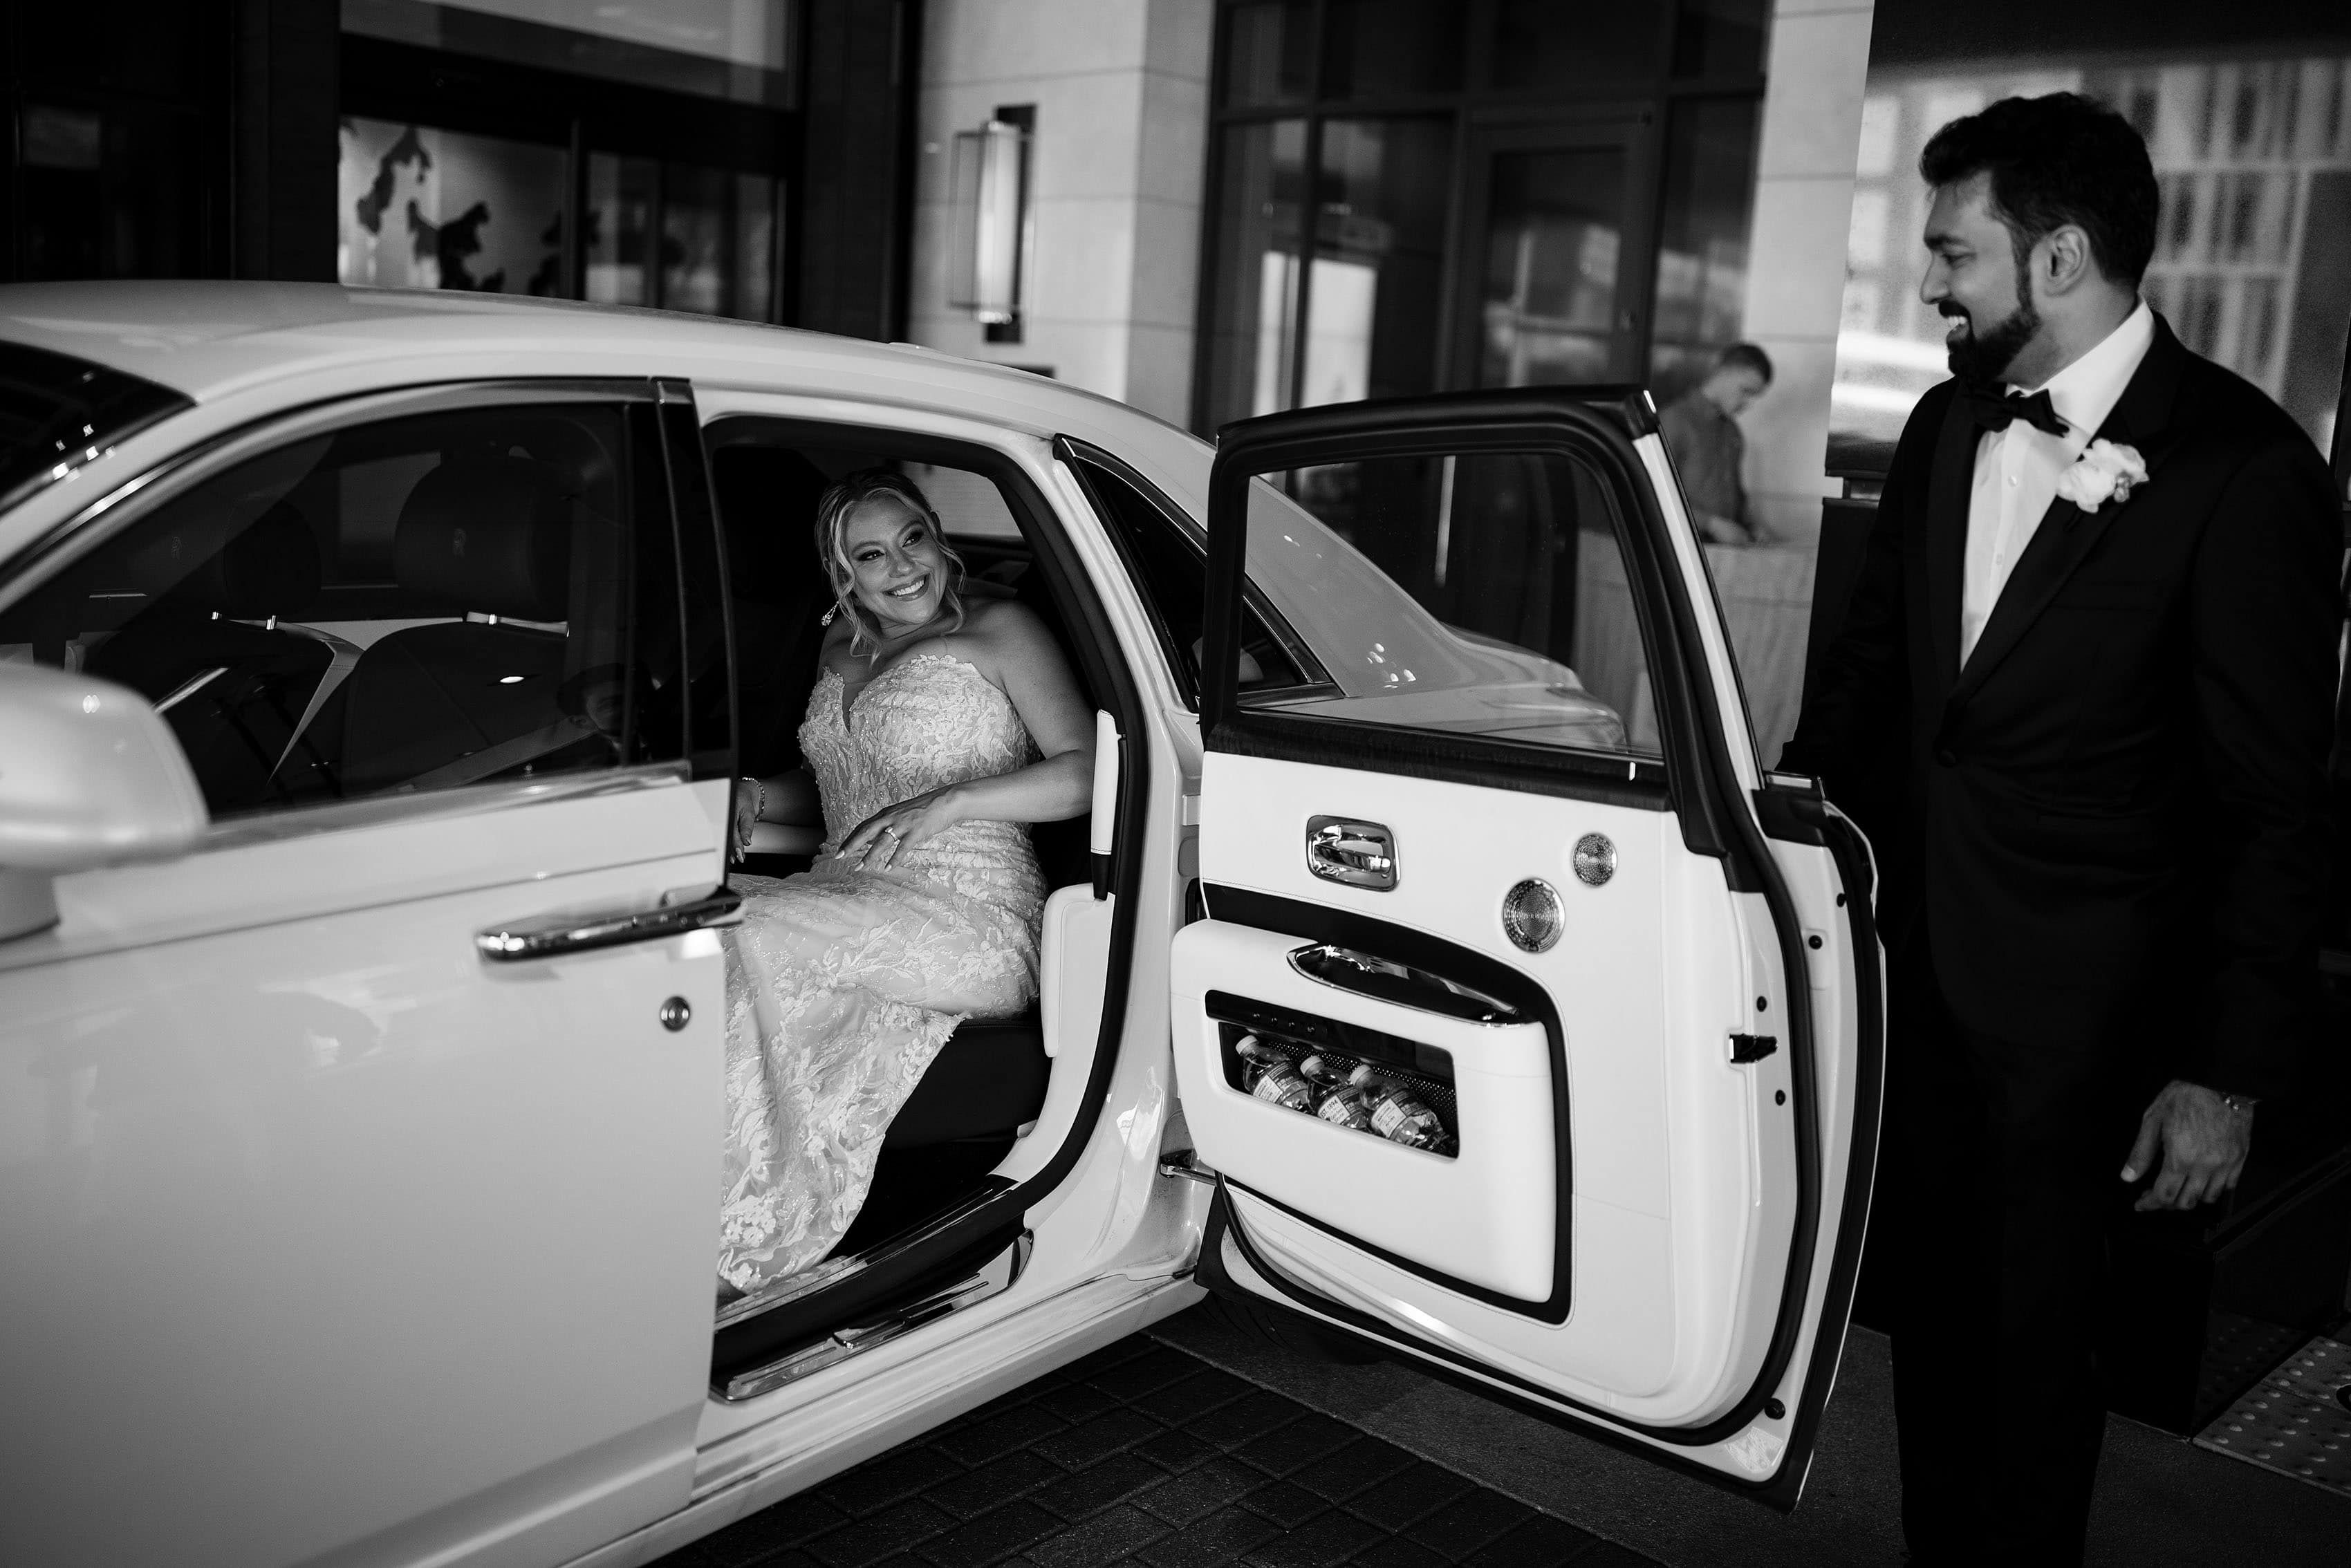 The groom helps the bride into a Rolls Royce